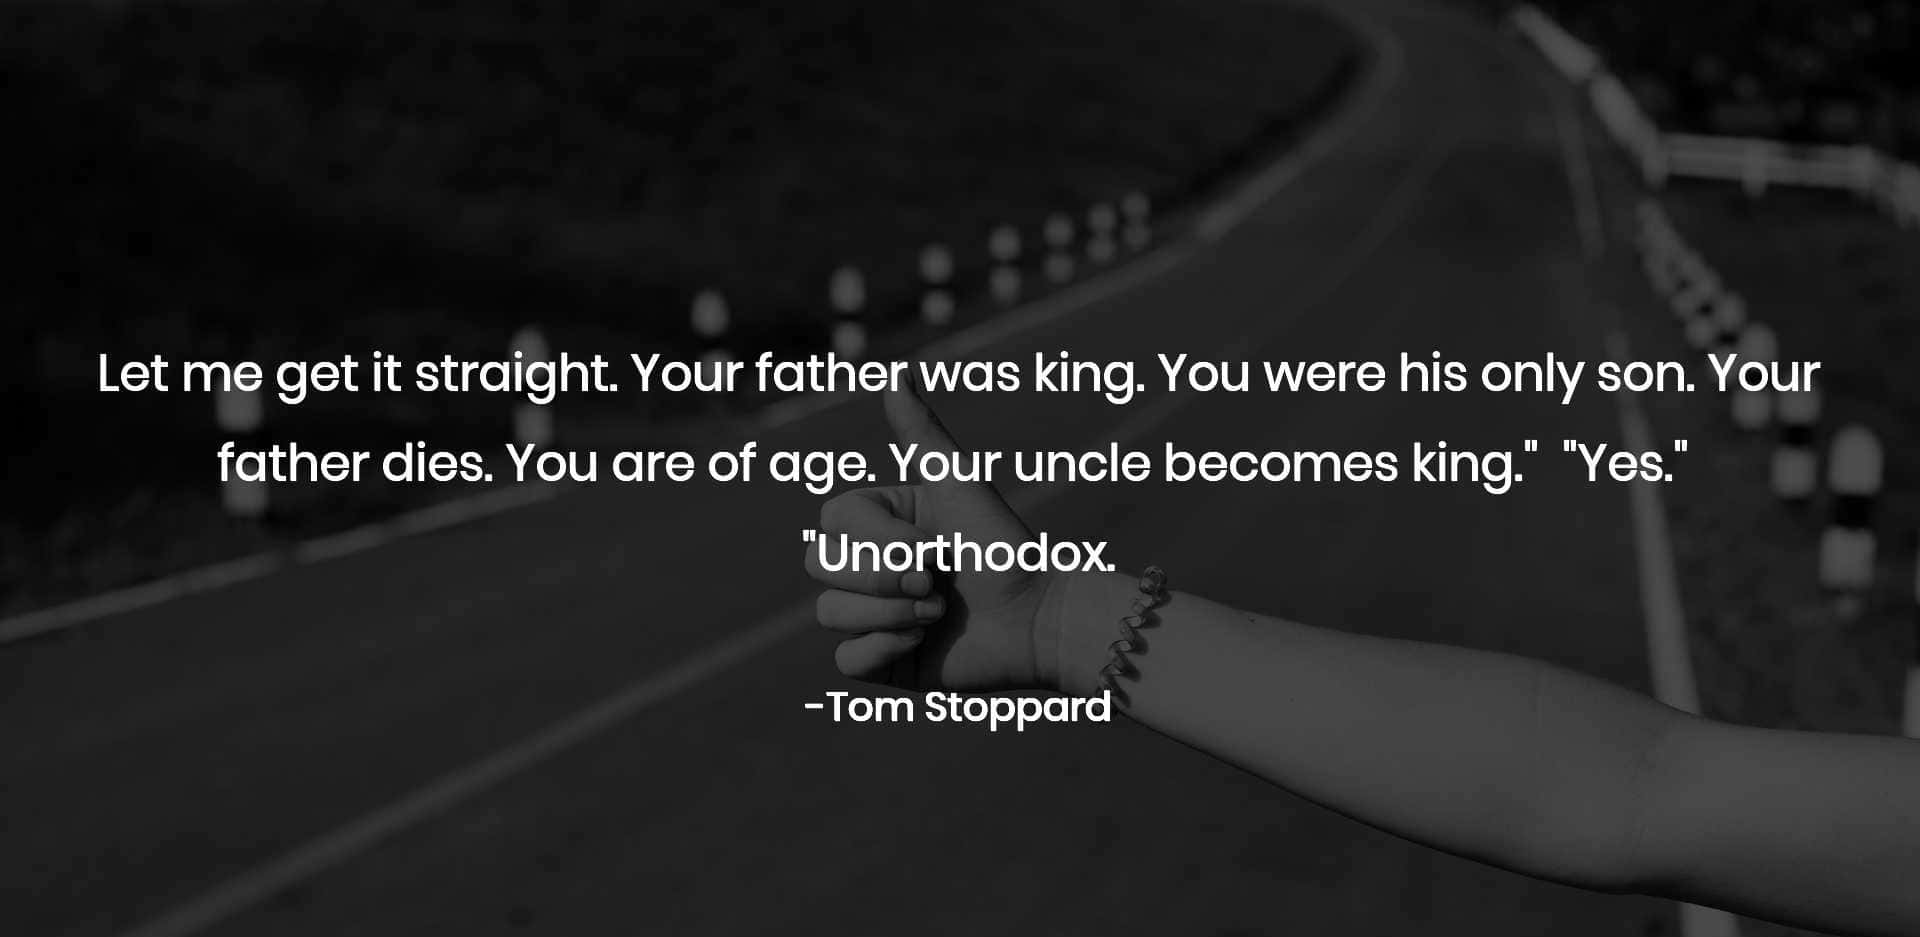 Unorthodox Quotes By Tom Stoppard Wallpaper